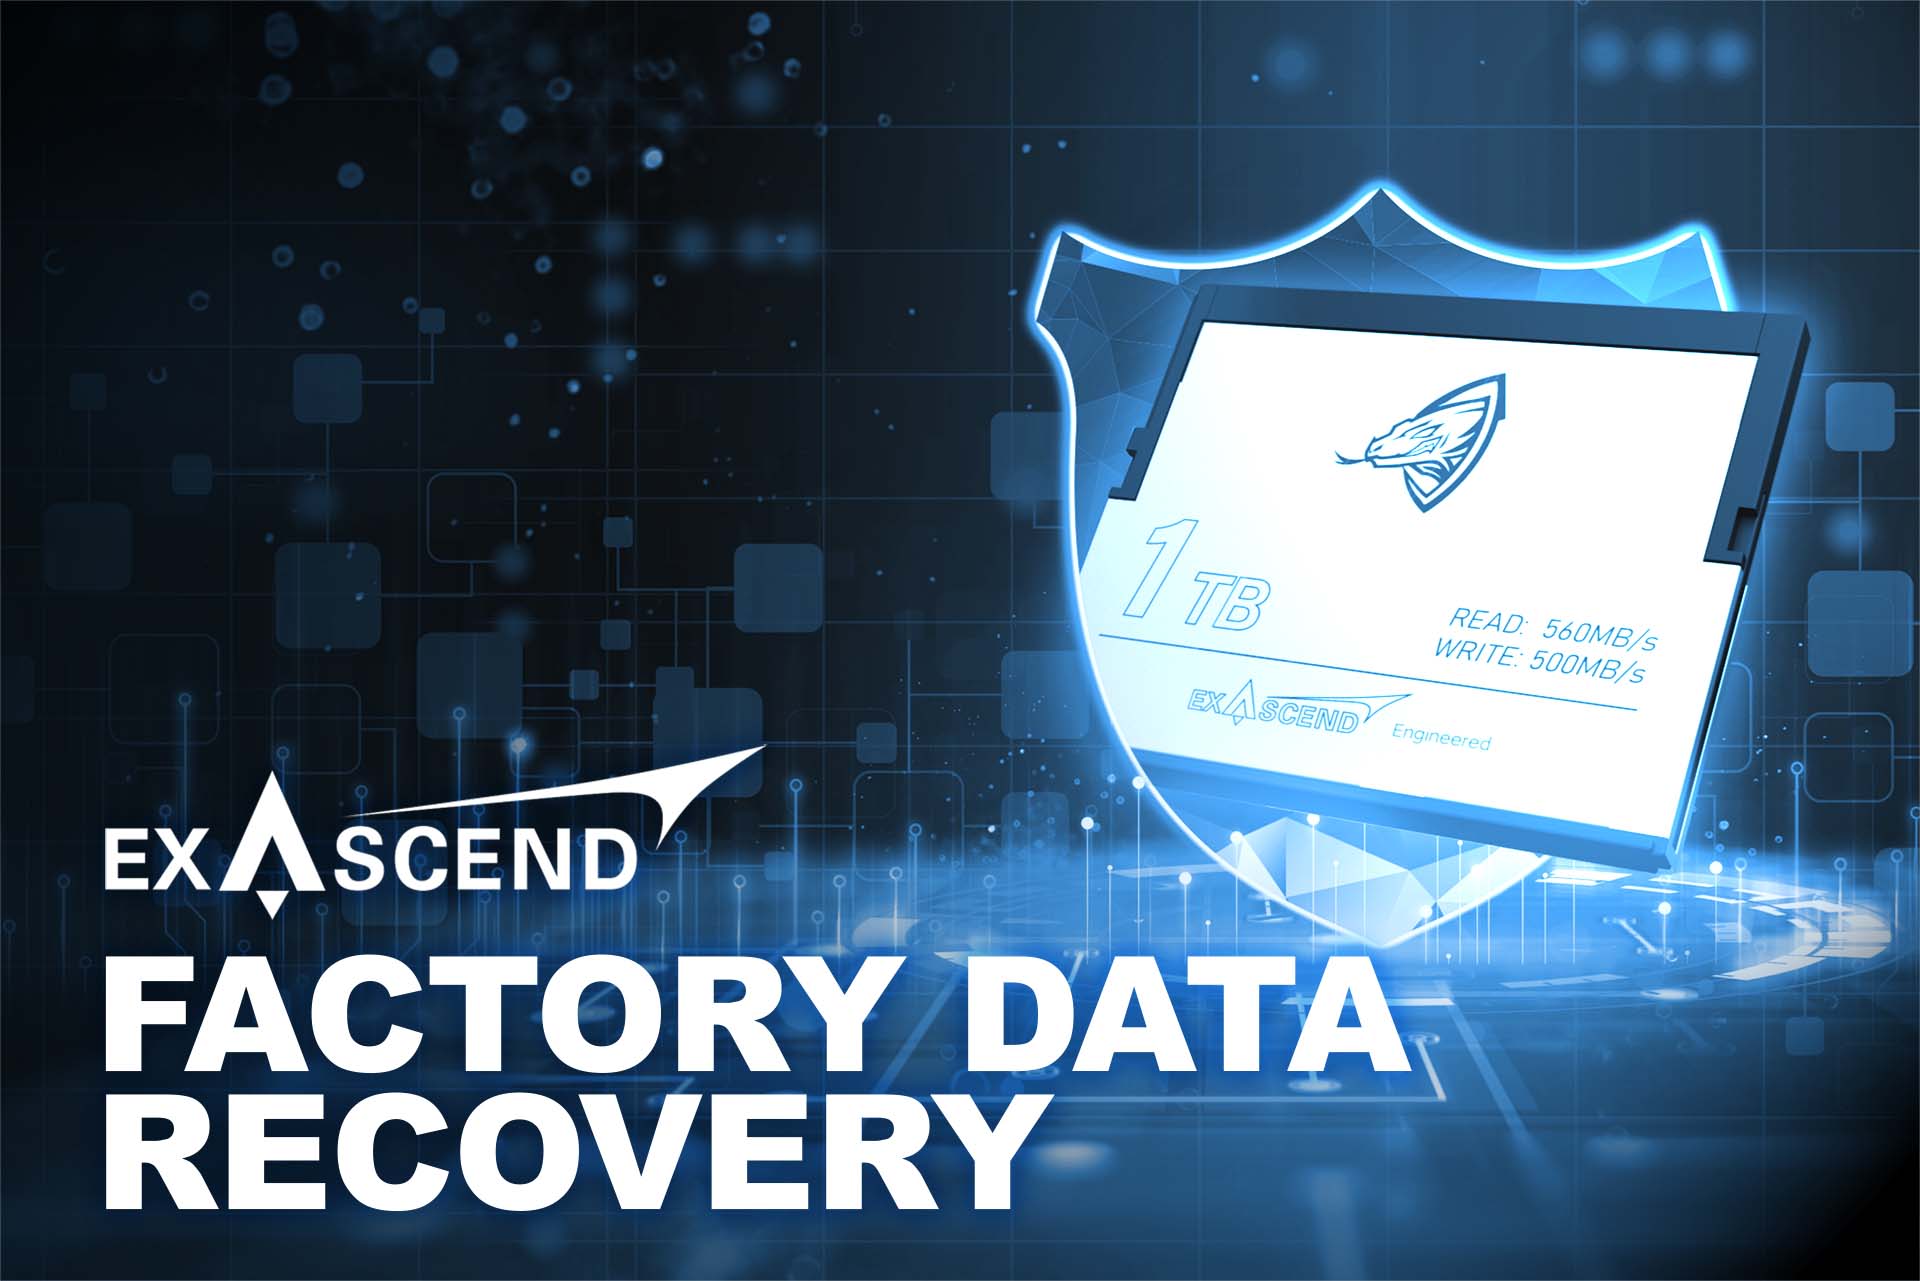 Image displaying Exascend's Archon CFast card alongside the text "Factory Data Recovery"